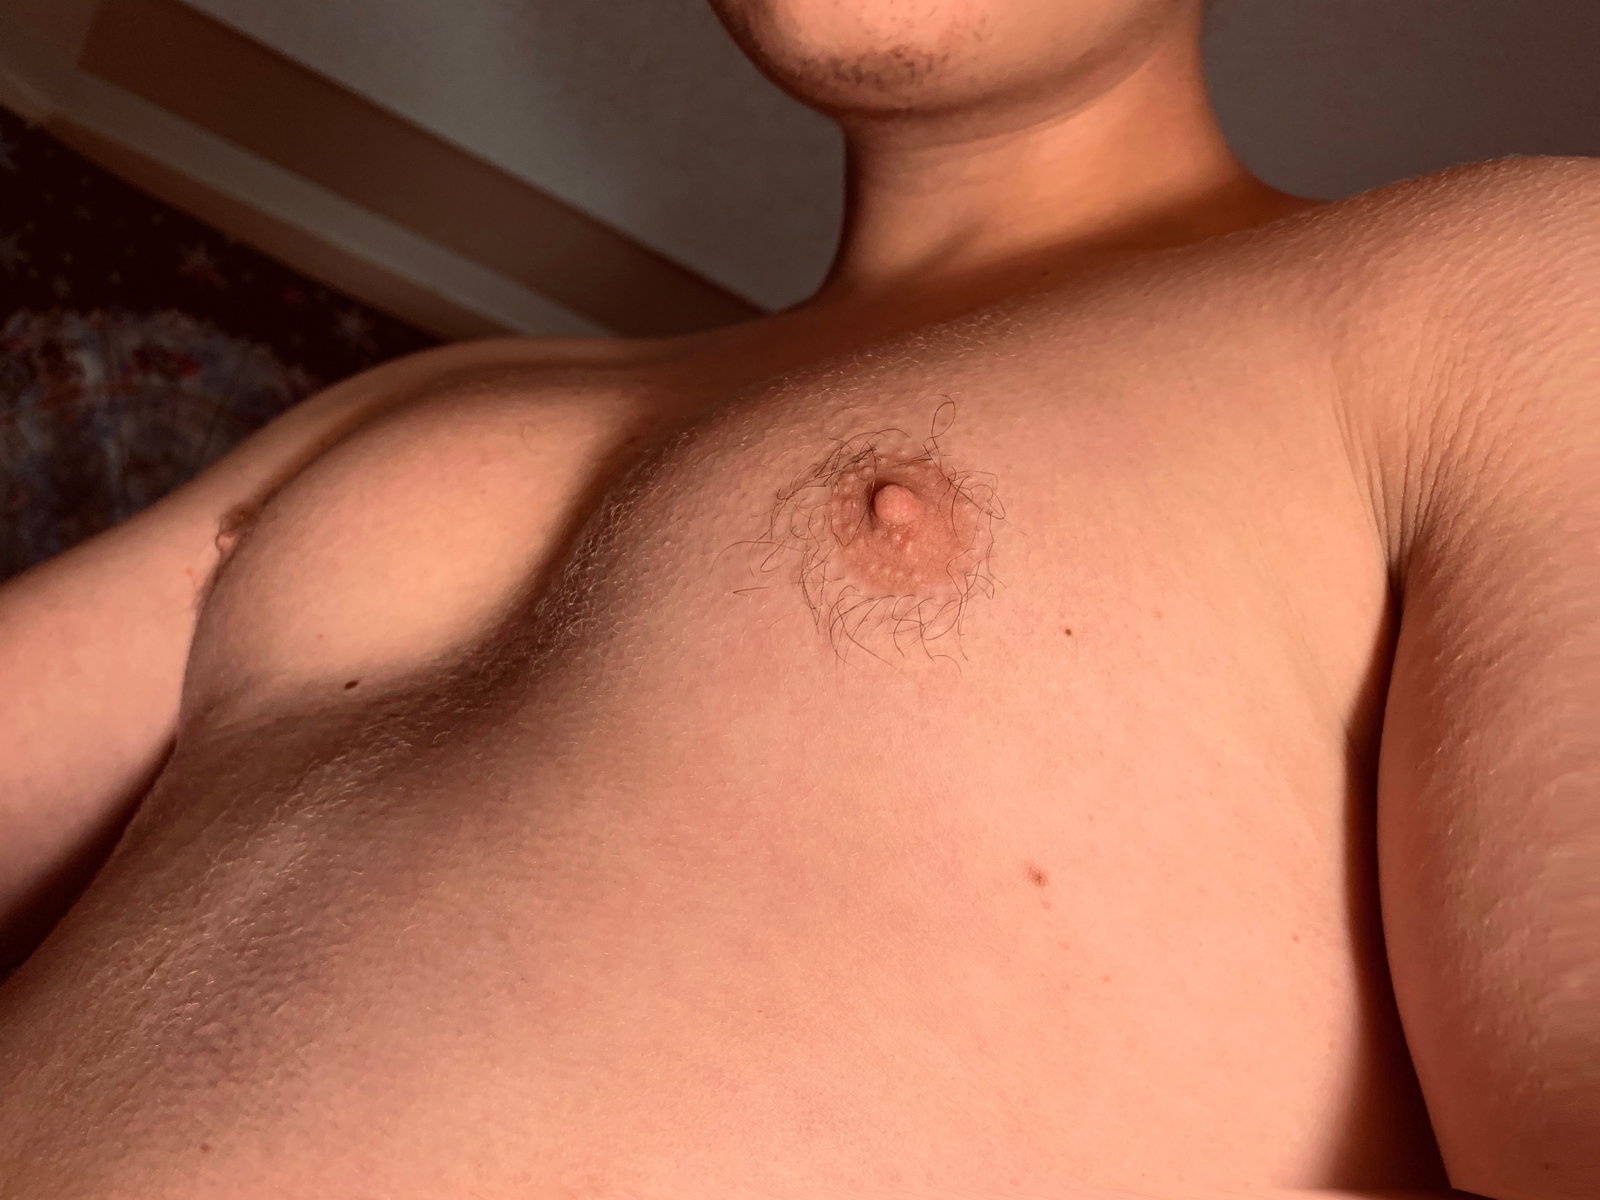 Photo by Jaxonlannock with the username @Jaxonlannock, who is a verified user,  October 13, 2019 at 5:13 AM. The post is about the topic GayTumblr and the text says 'A shot of my chest before bed (:'